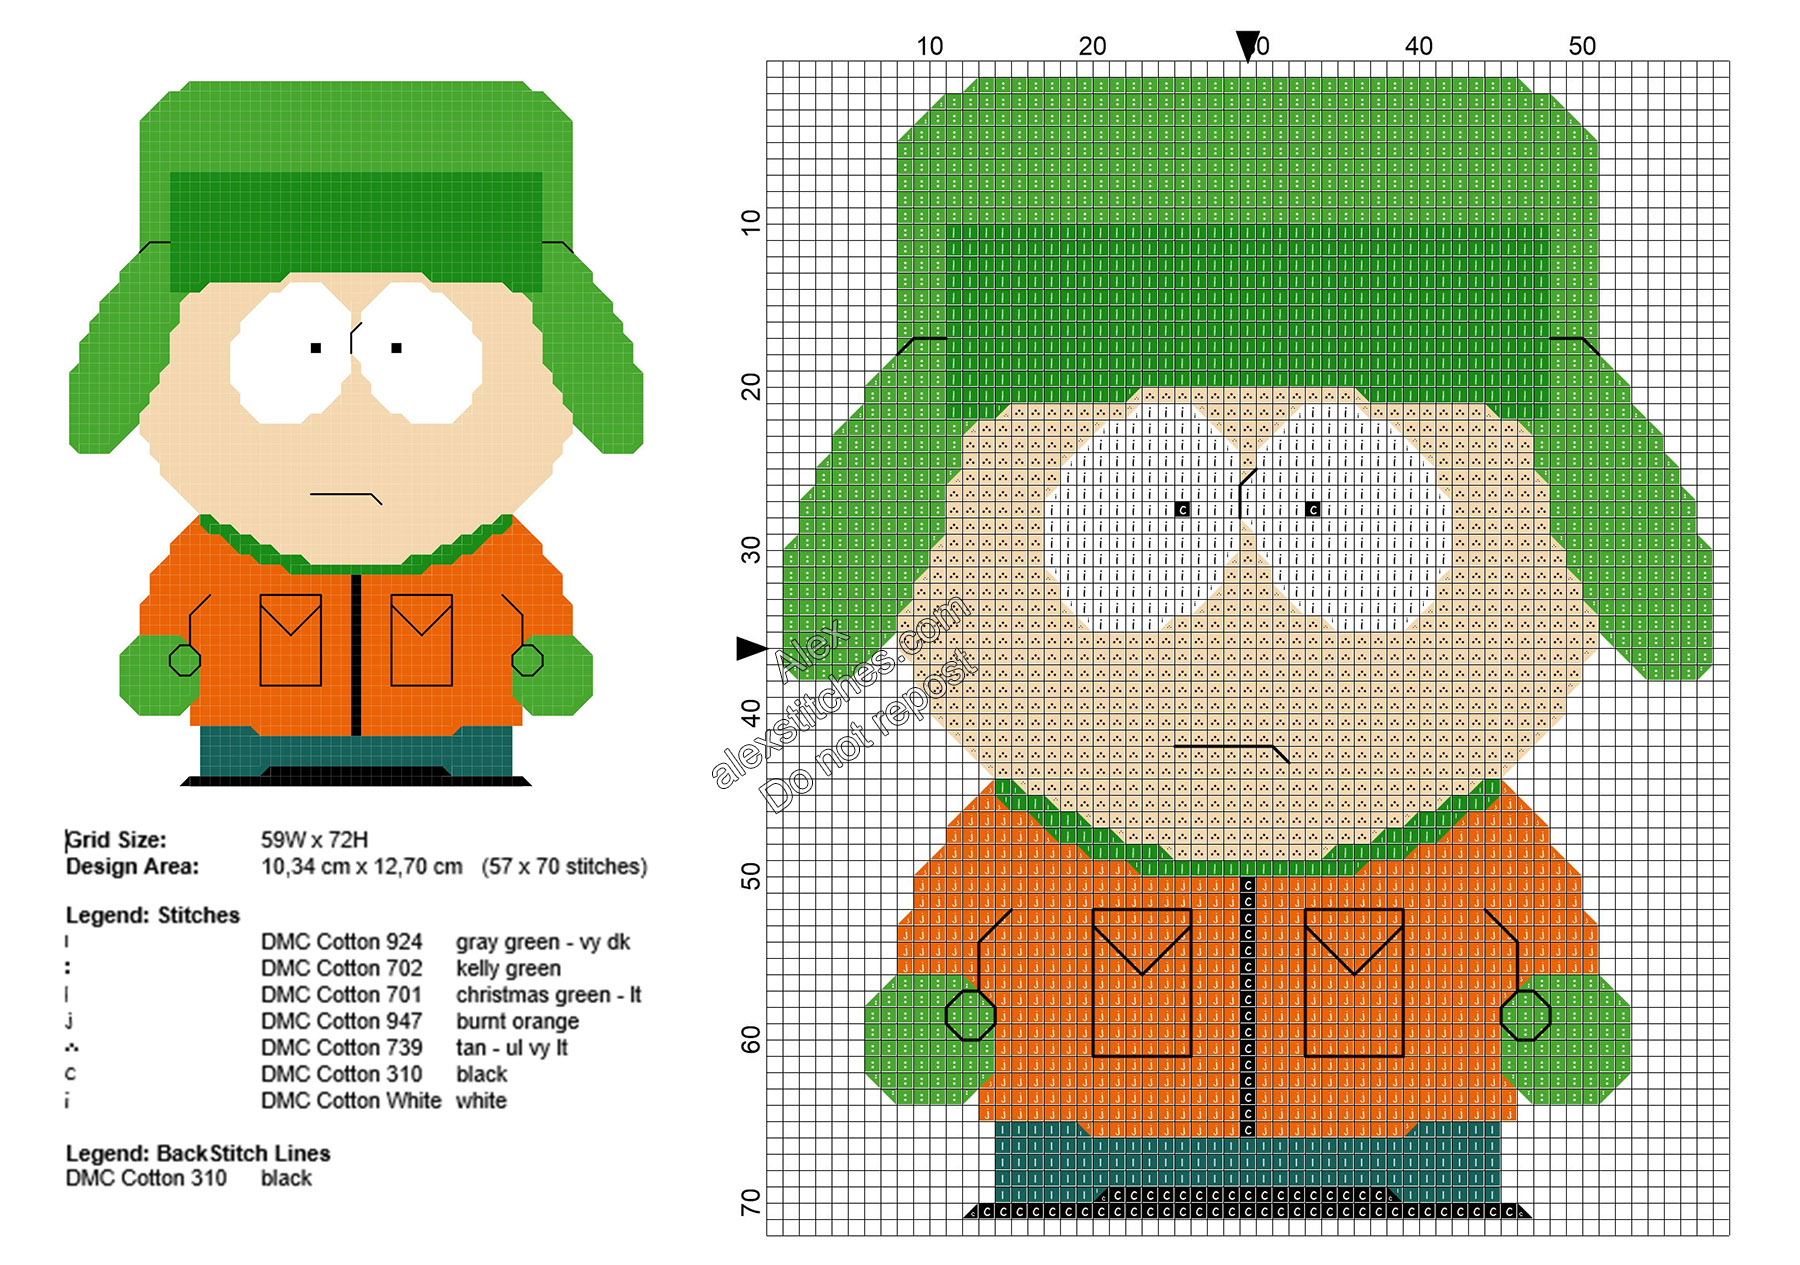 Kyle South Park character free cross stitch pattern 57x70